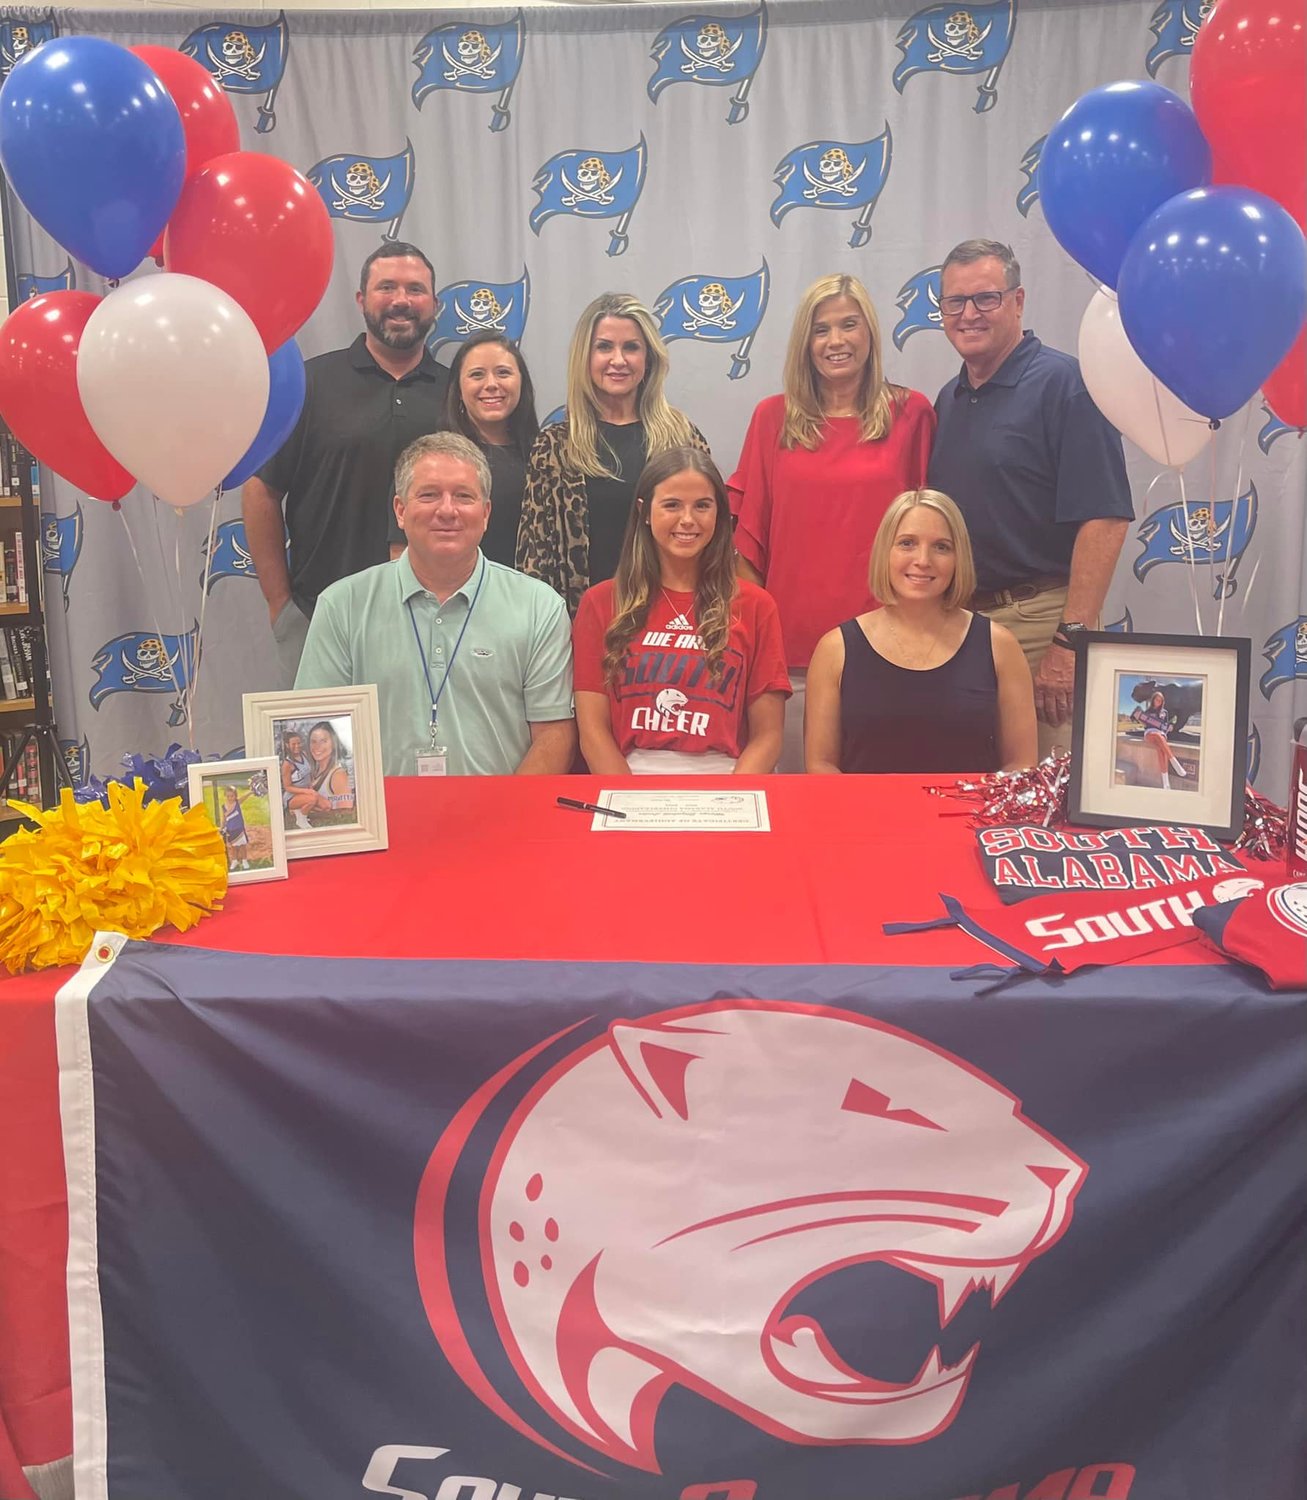 Maryn Lester, a recent graduate of Fairhope High School, inked her commitment to cheer for the University of South Alabama Jaguars in the fall during a May 17 ceremony at the high school. Her family joined her at the signing ceremony.